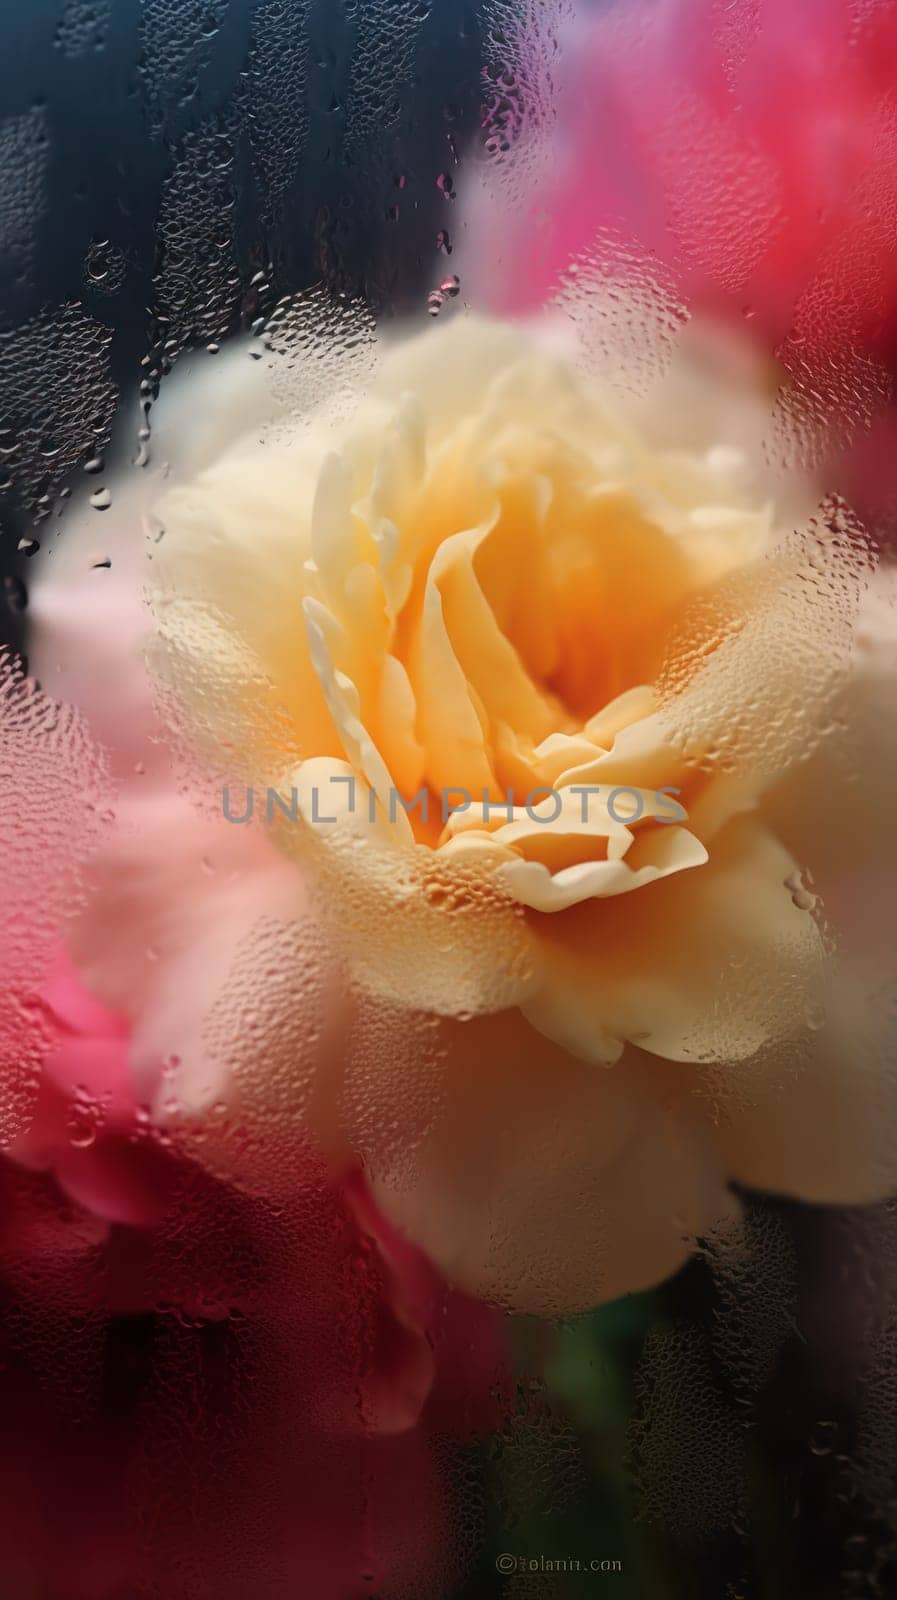 Background of blooming flowers in front of glass with water drops Stock Photo.